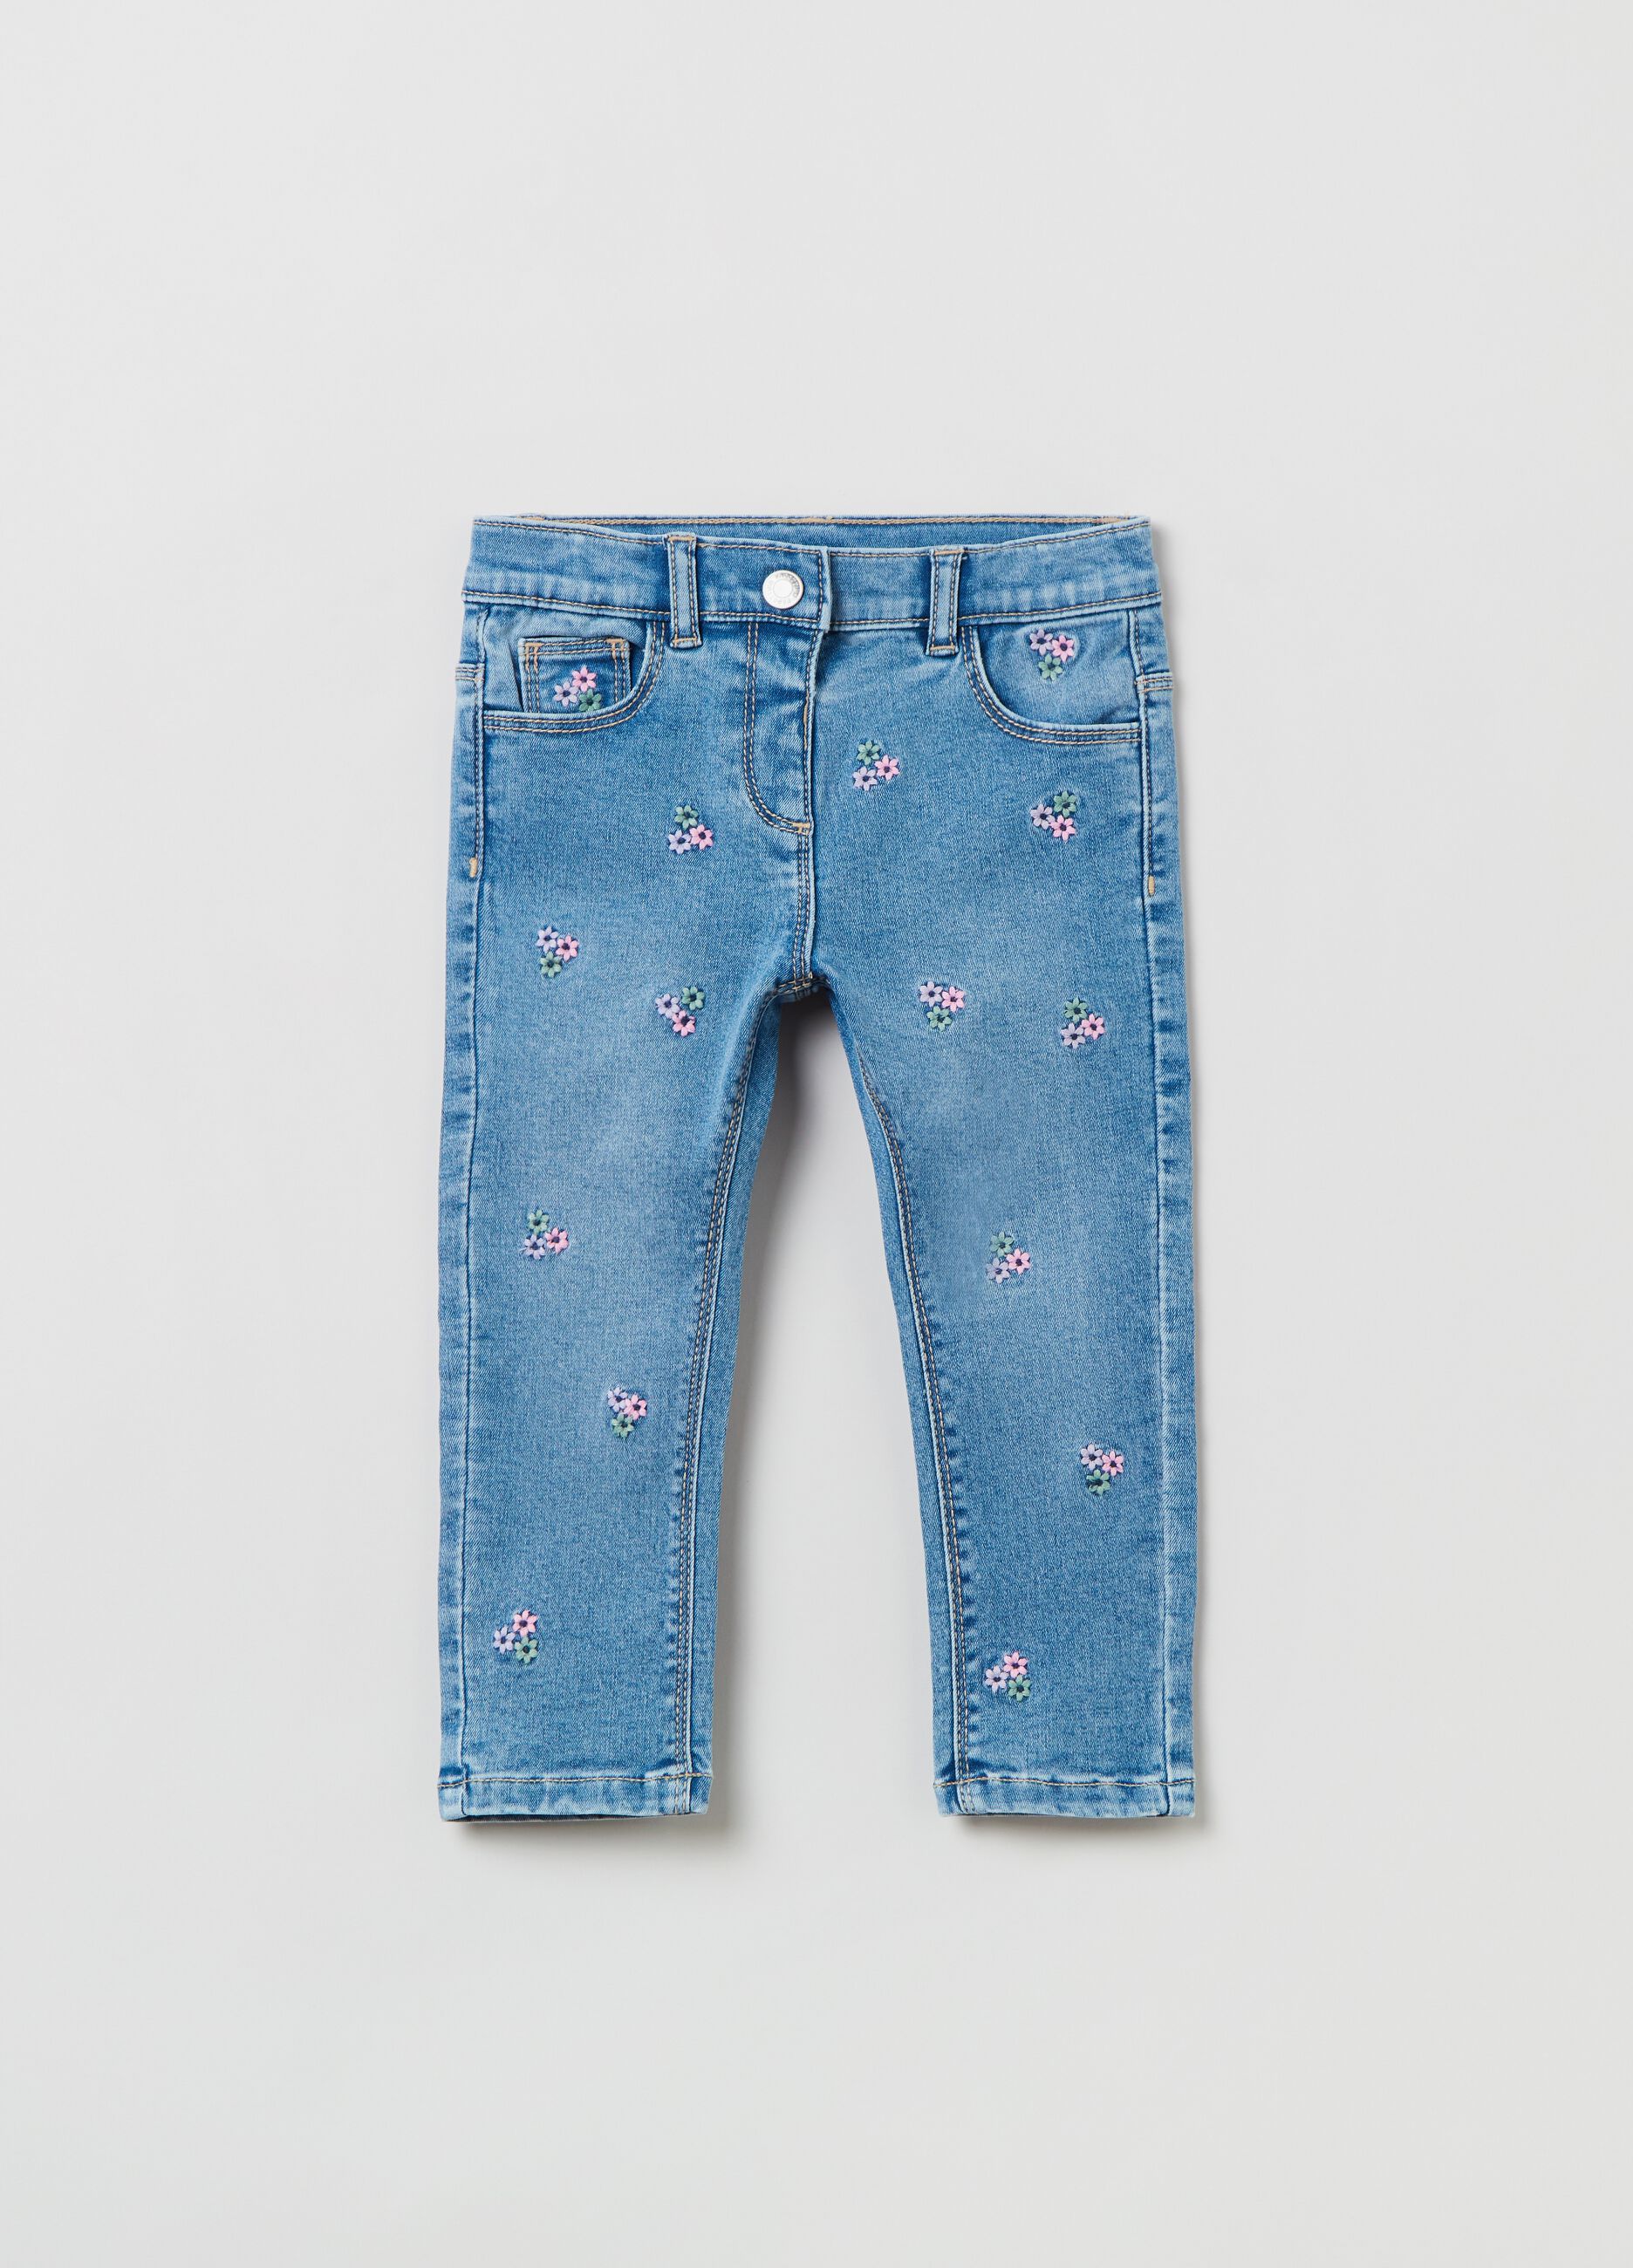 Five-pocket jeans with embroidered floral motif